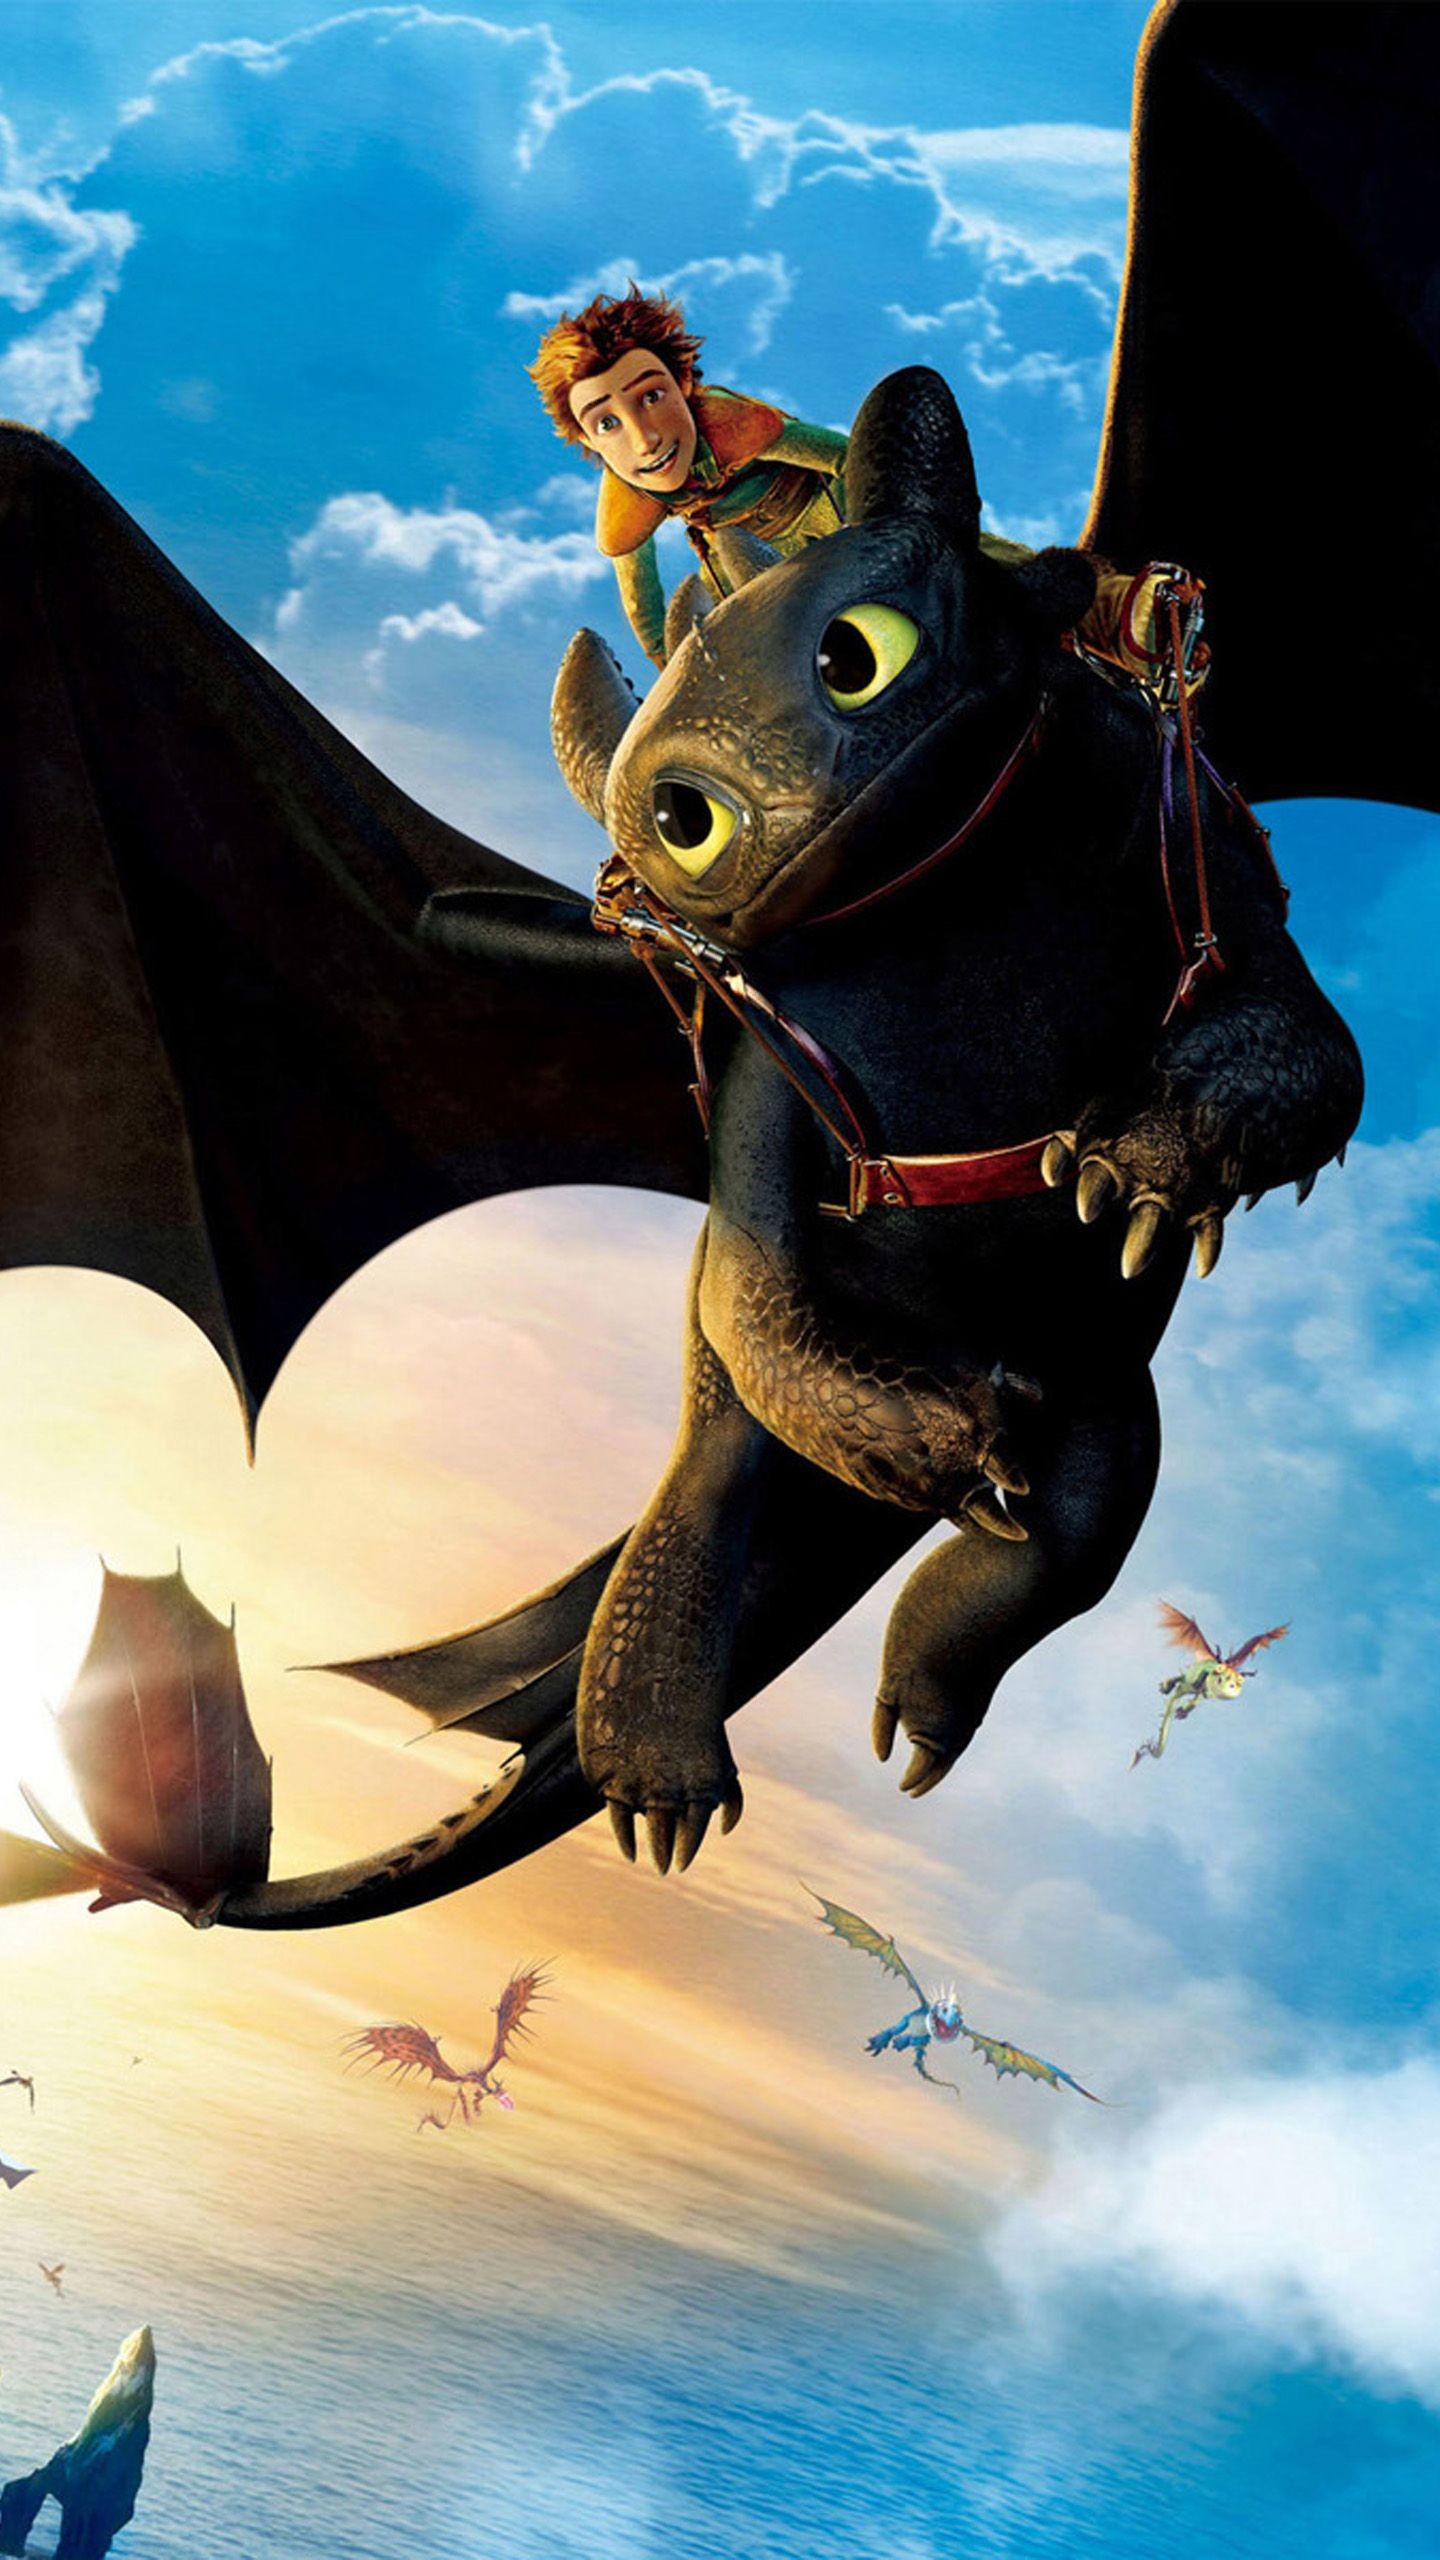 1440x2560 100% HDQ How To Train Your Dragon Wallpapers | Desktop 4K High .